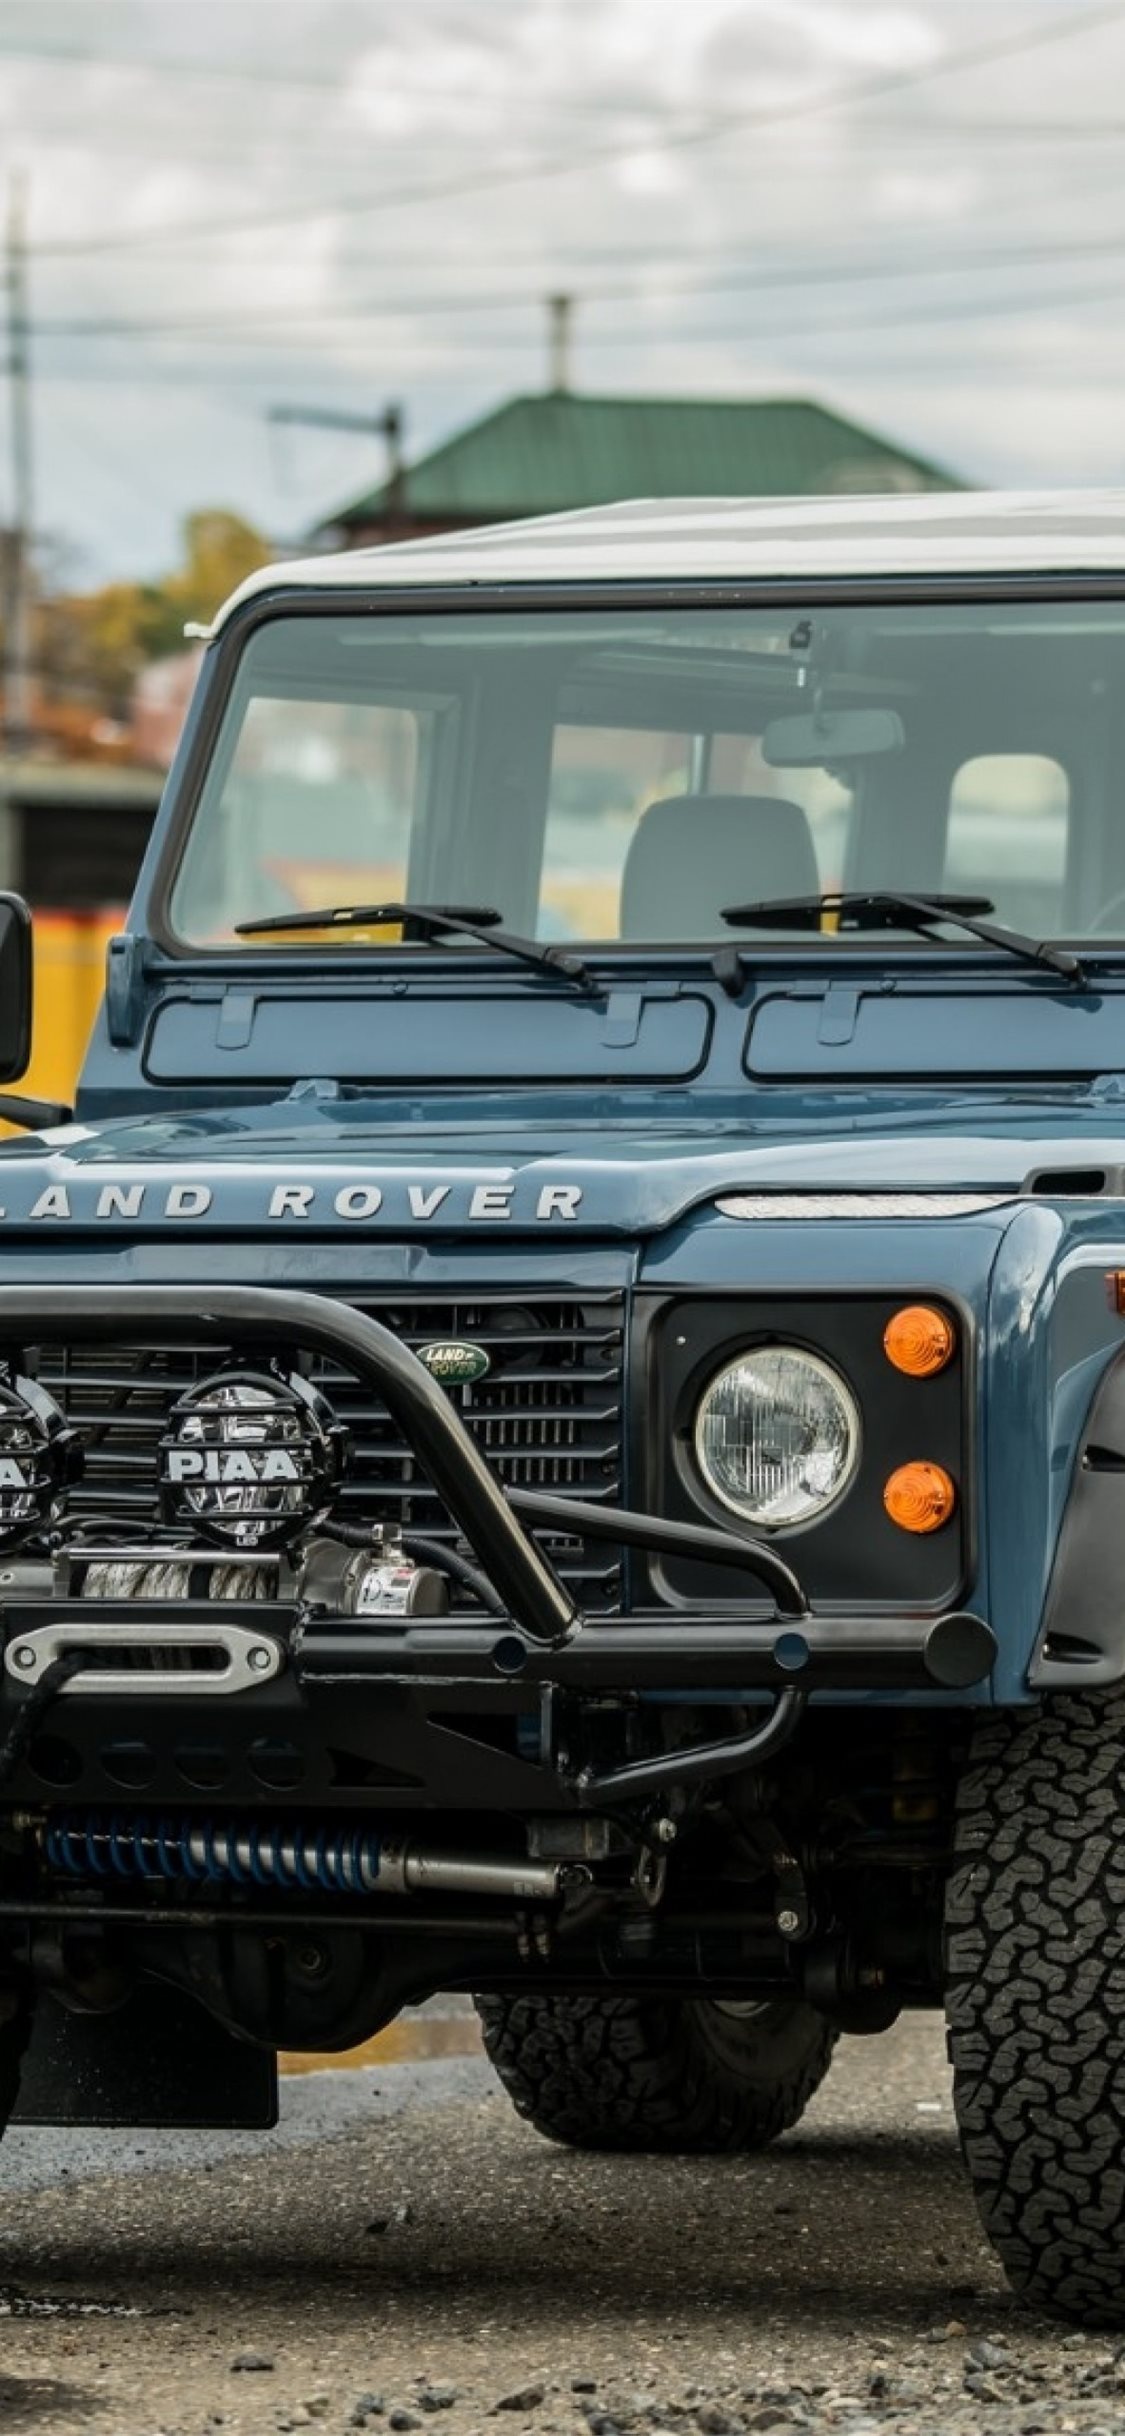 Land Rover Defender, Off-road cars, Google iPhone wallpapers, Free download, 1130x2440 HD Phone